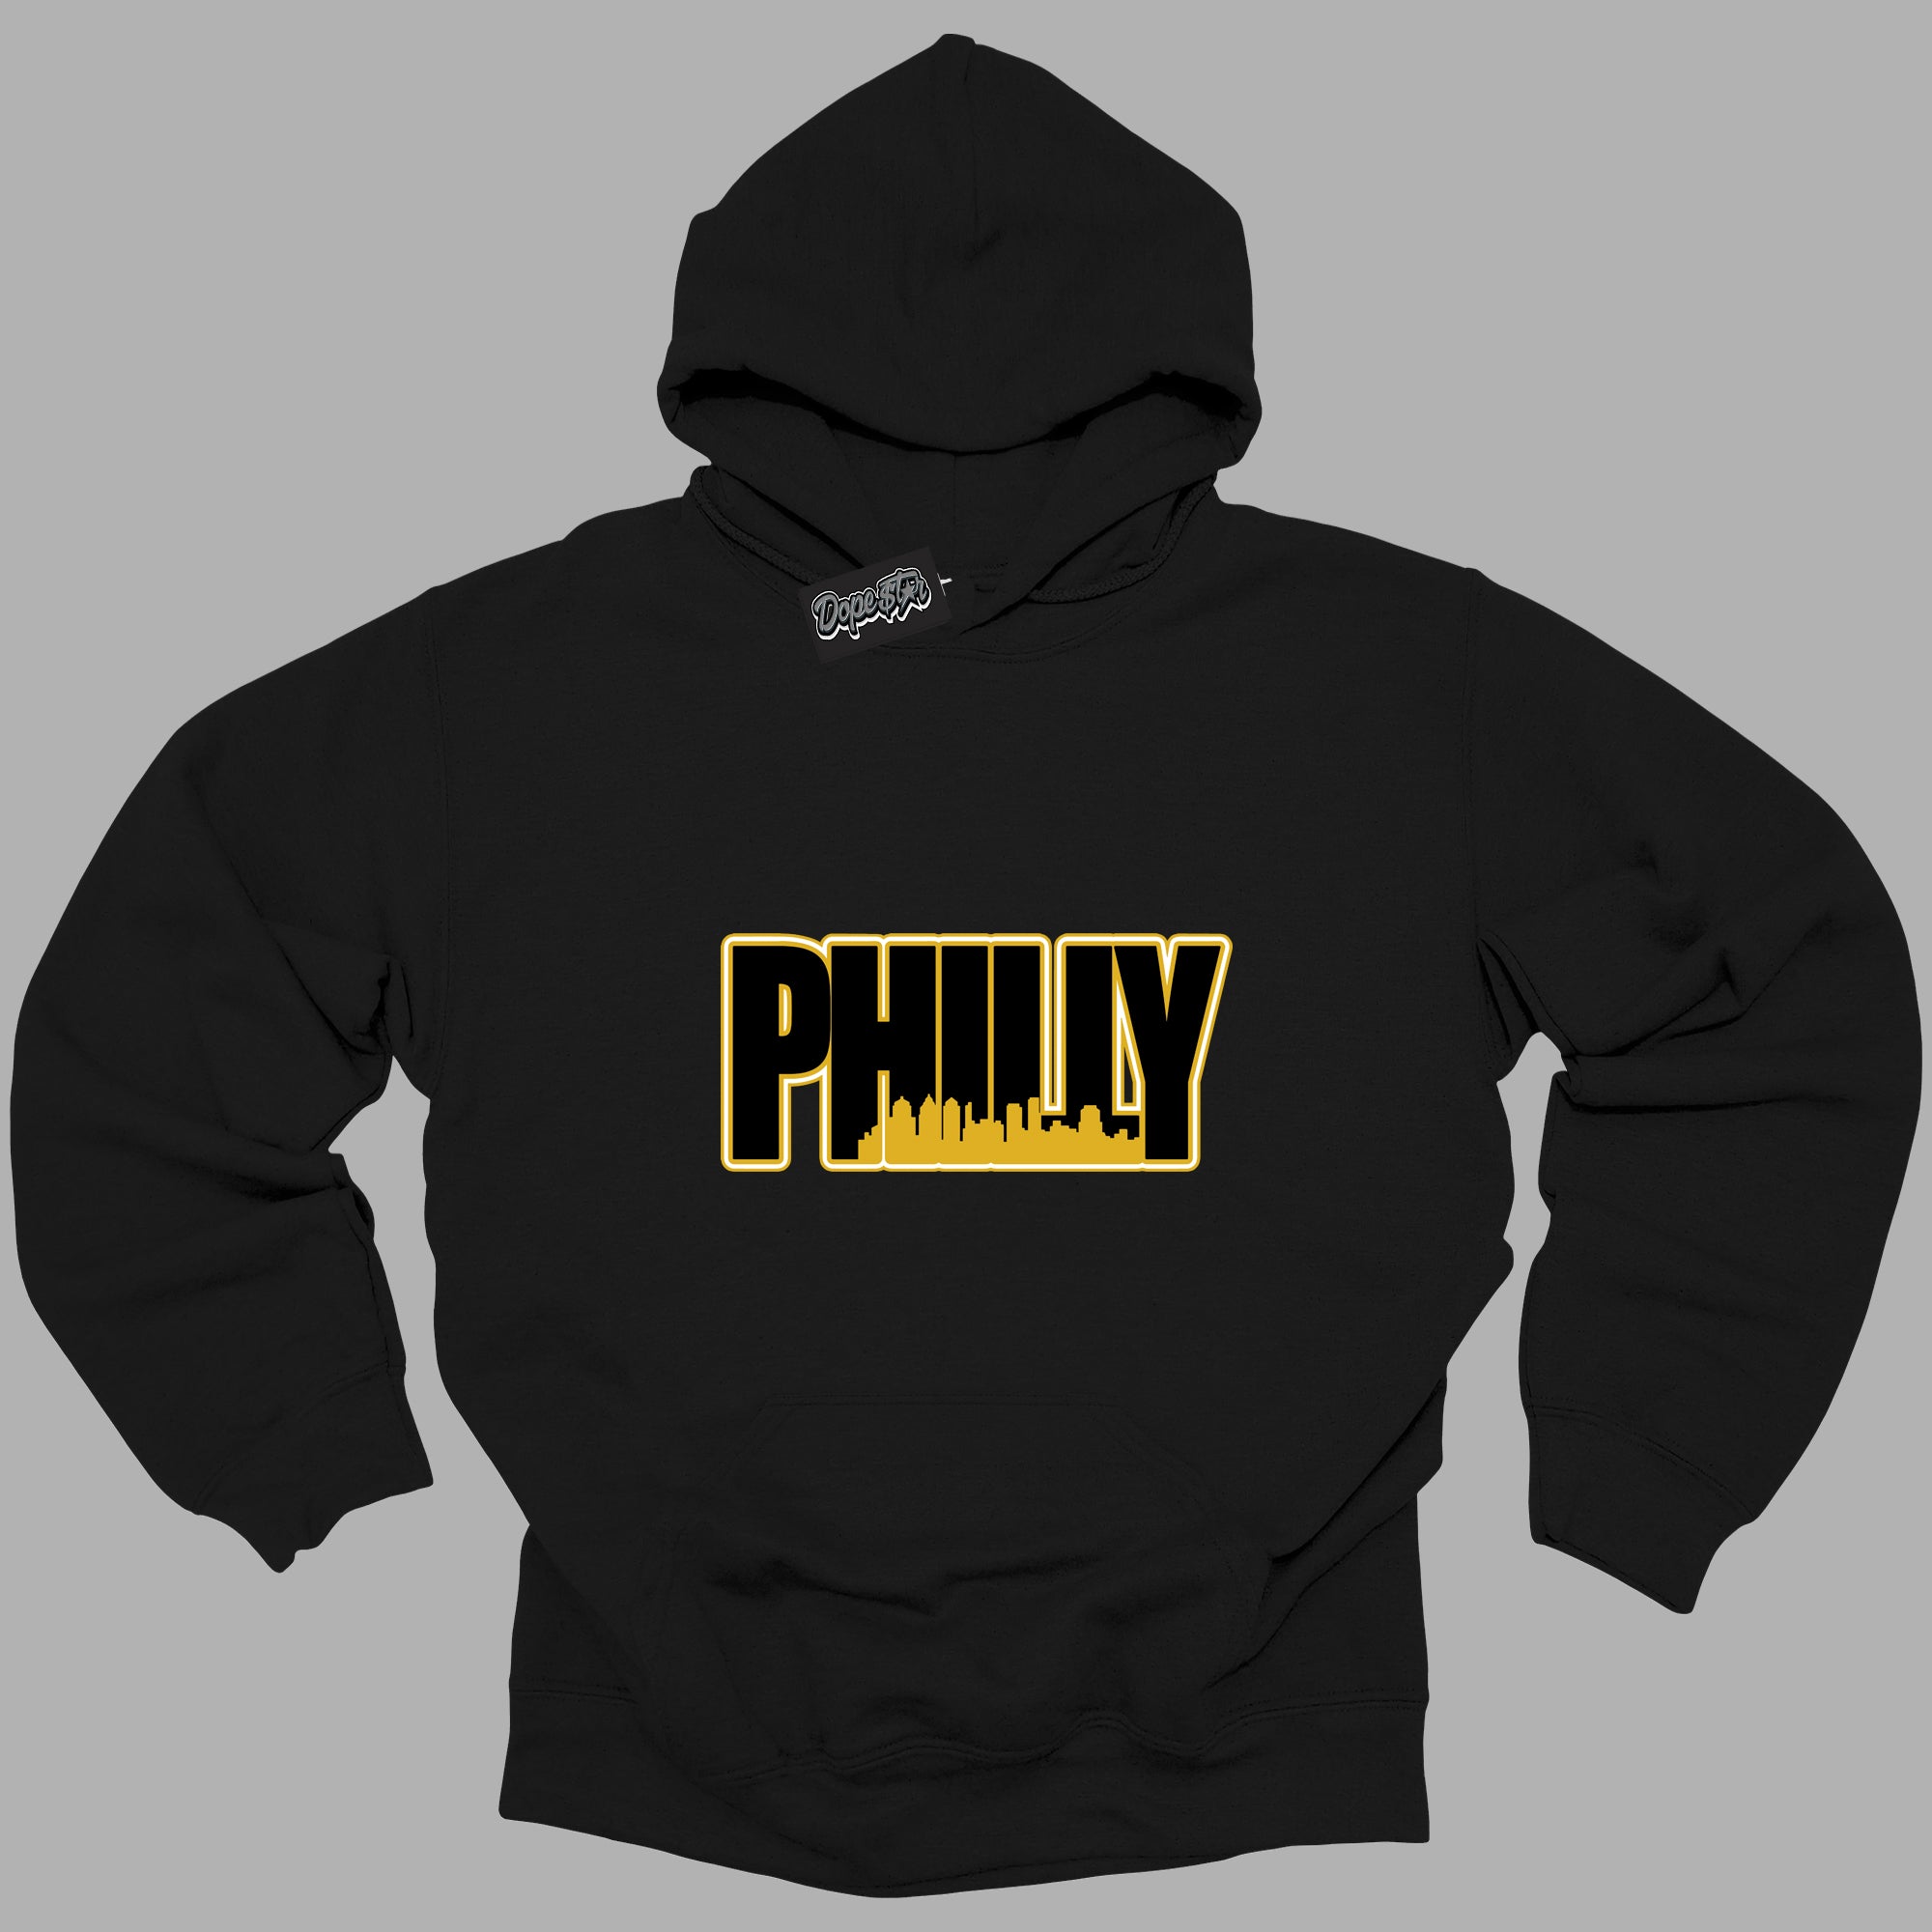 Cool Black Hoodie with “ Philly ”  design that Perfectly Matches Yellow Ochre 6s Sneakers.